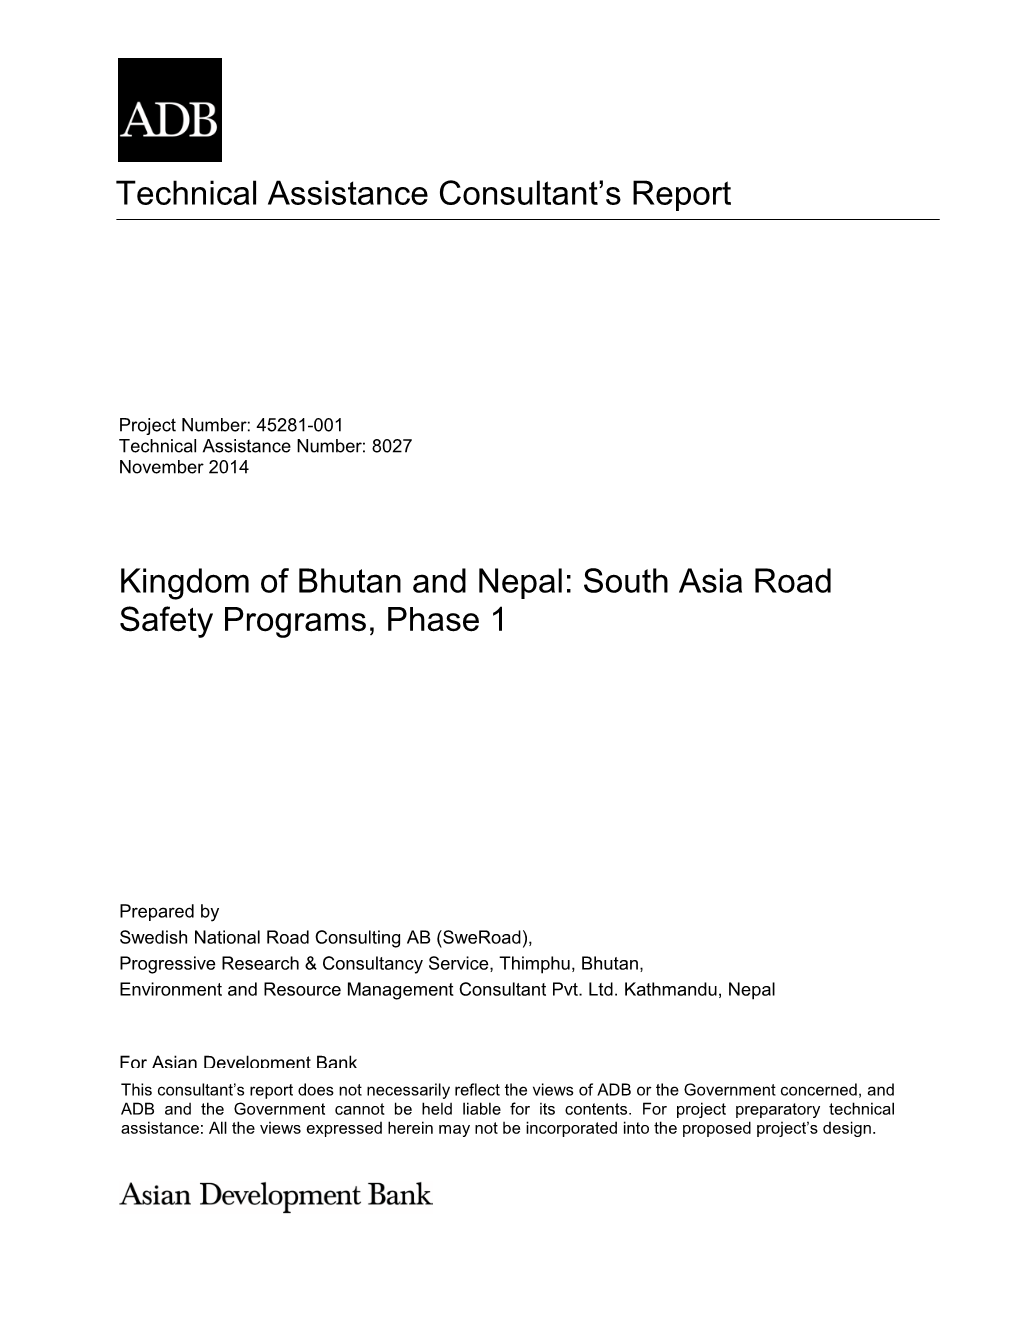 45281-001: Technical Assistance Consultant's Report